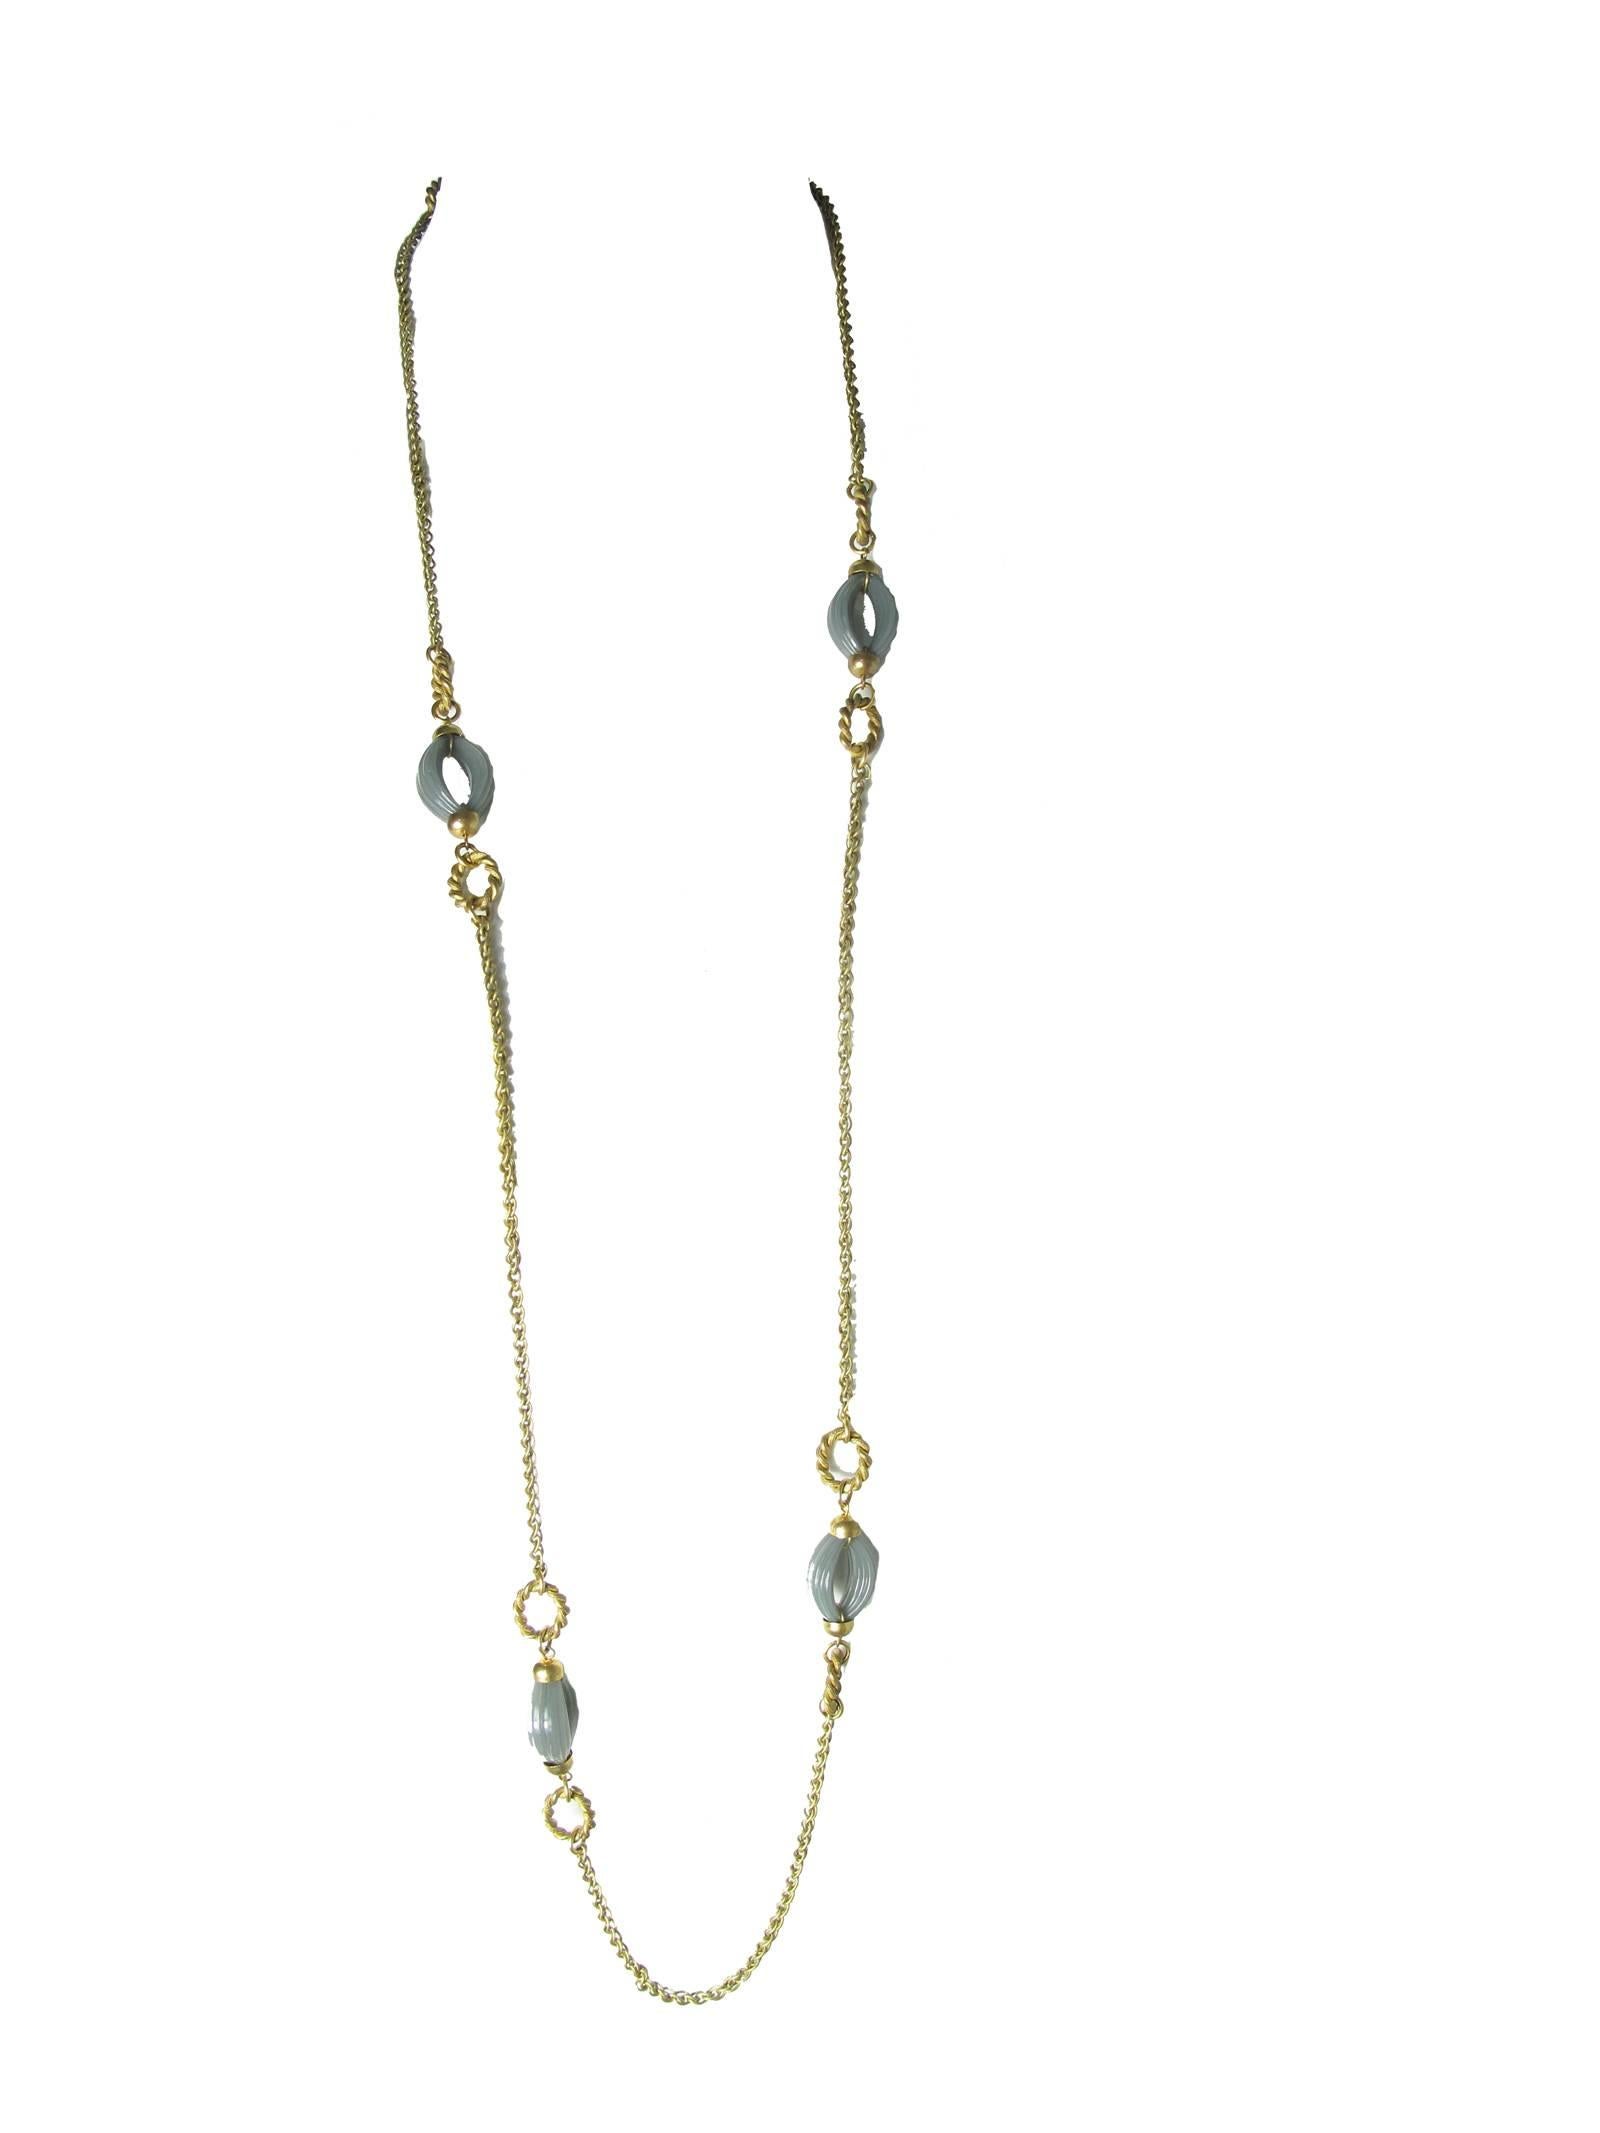 Women's Miriam Haskell Goldtone Chain Necklace with Grey Ovals